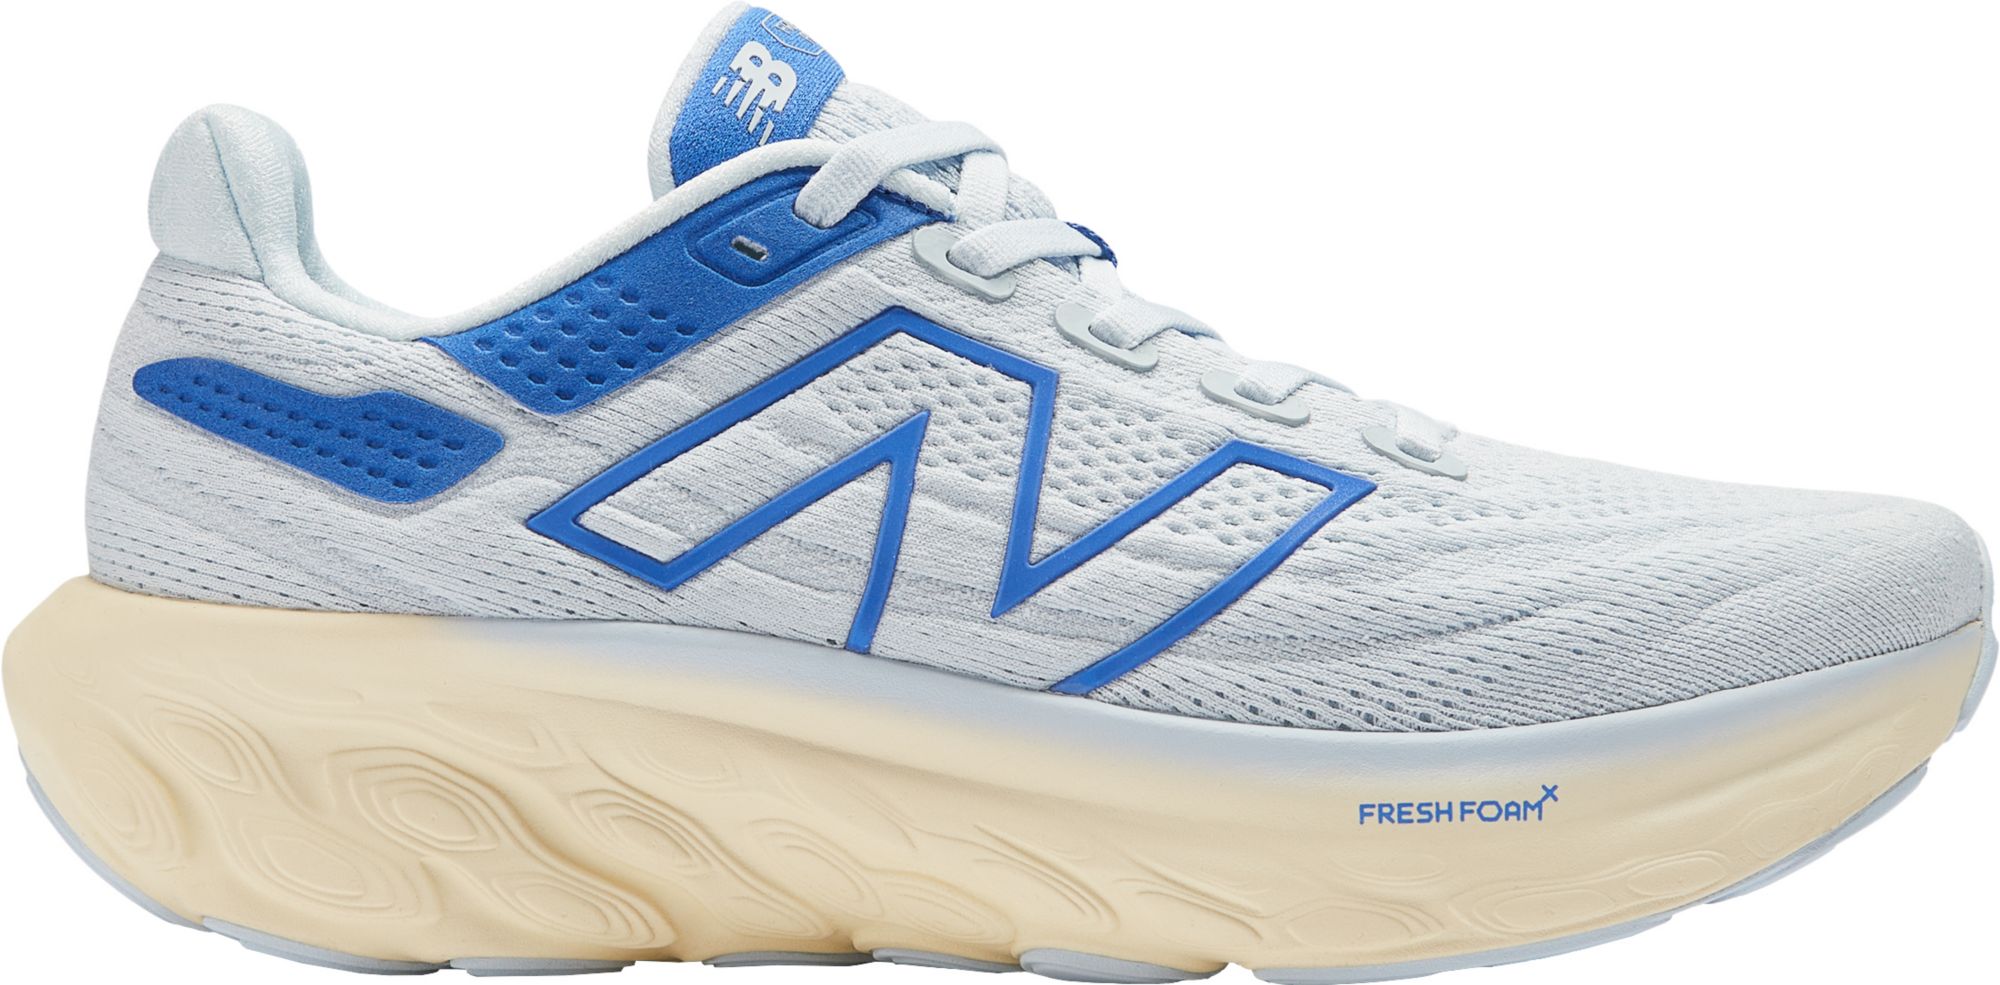 New Balance Shoes, Apparel, & Accessories